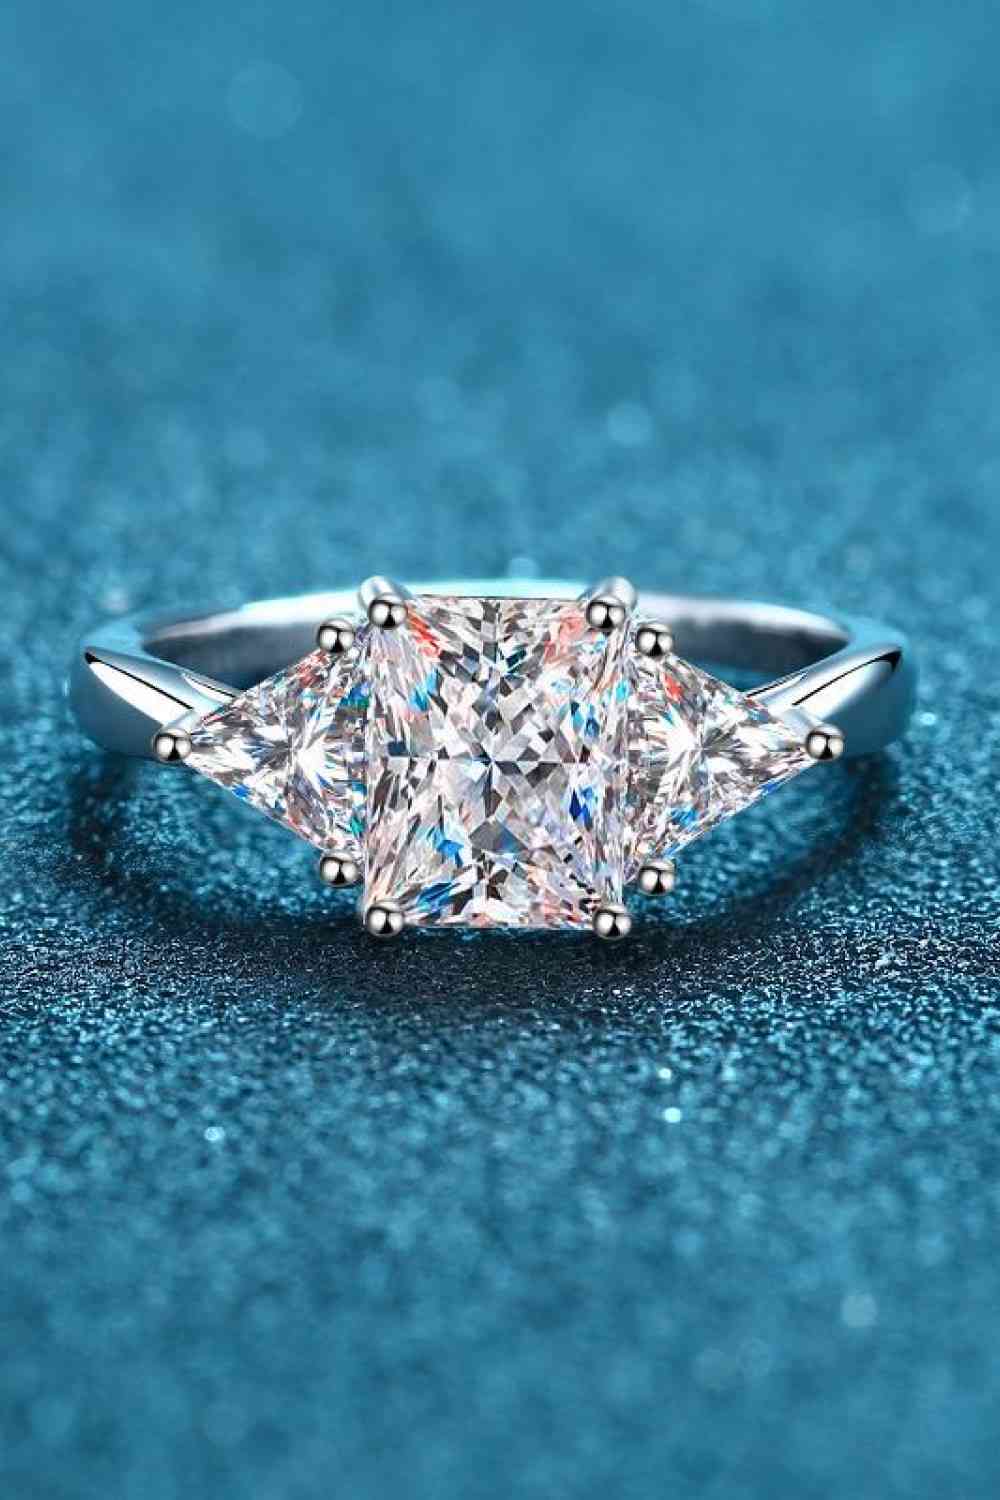 a three stone diamond ring on a blue surface